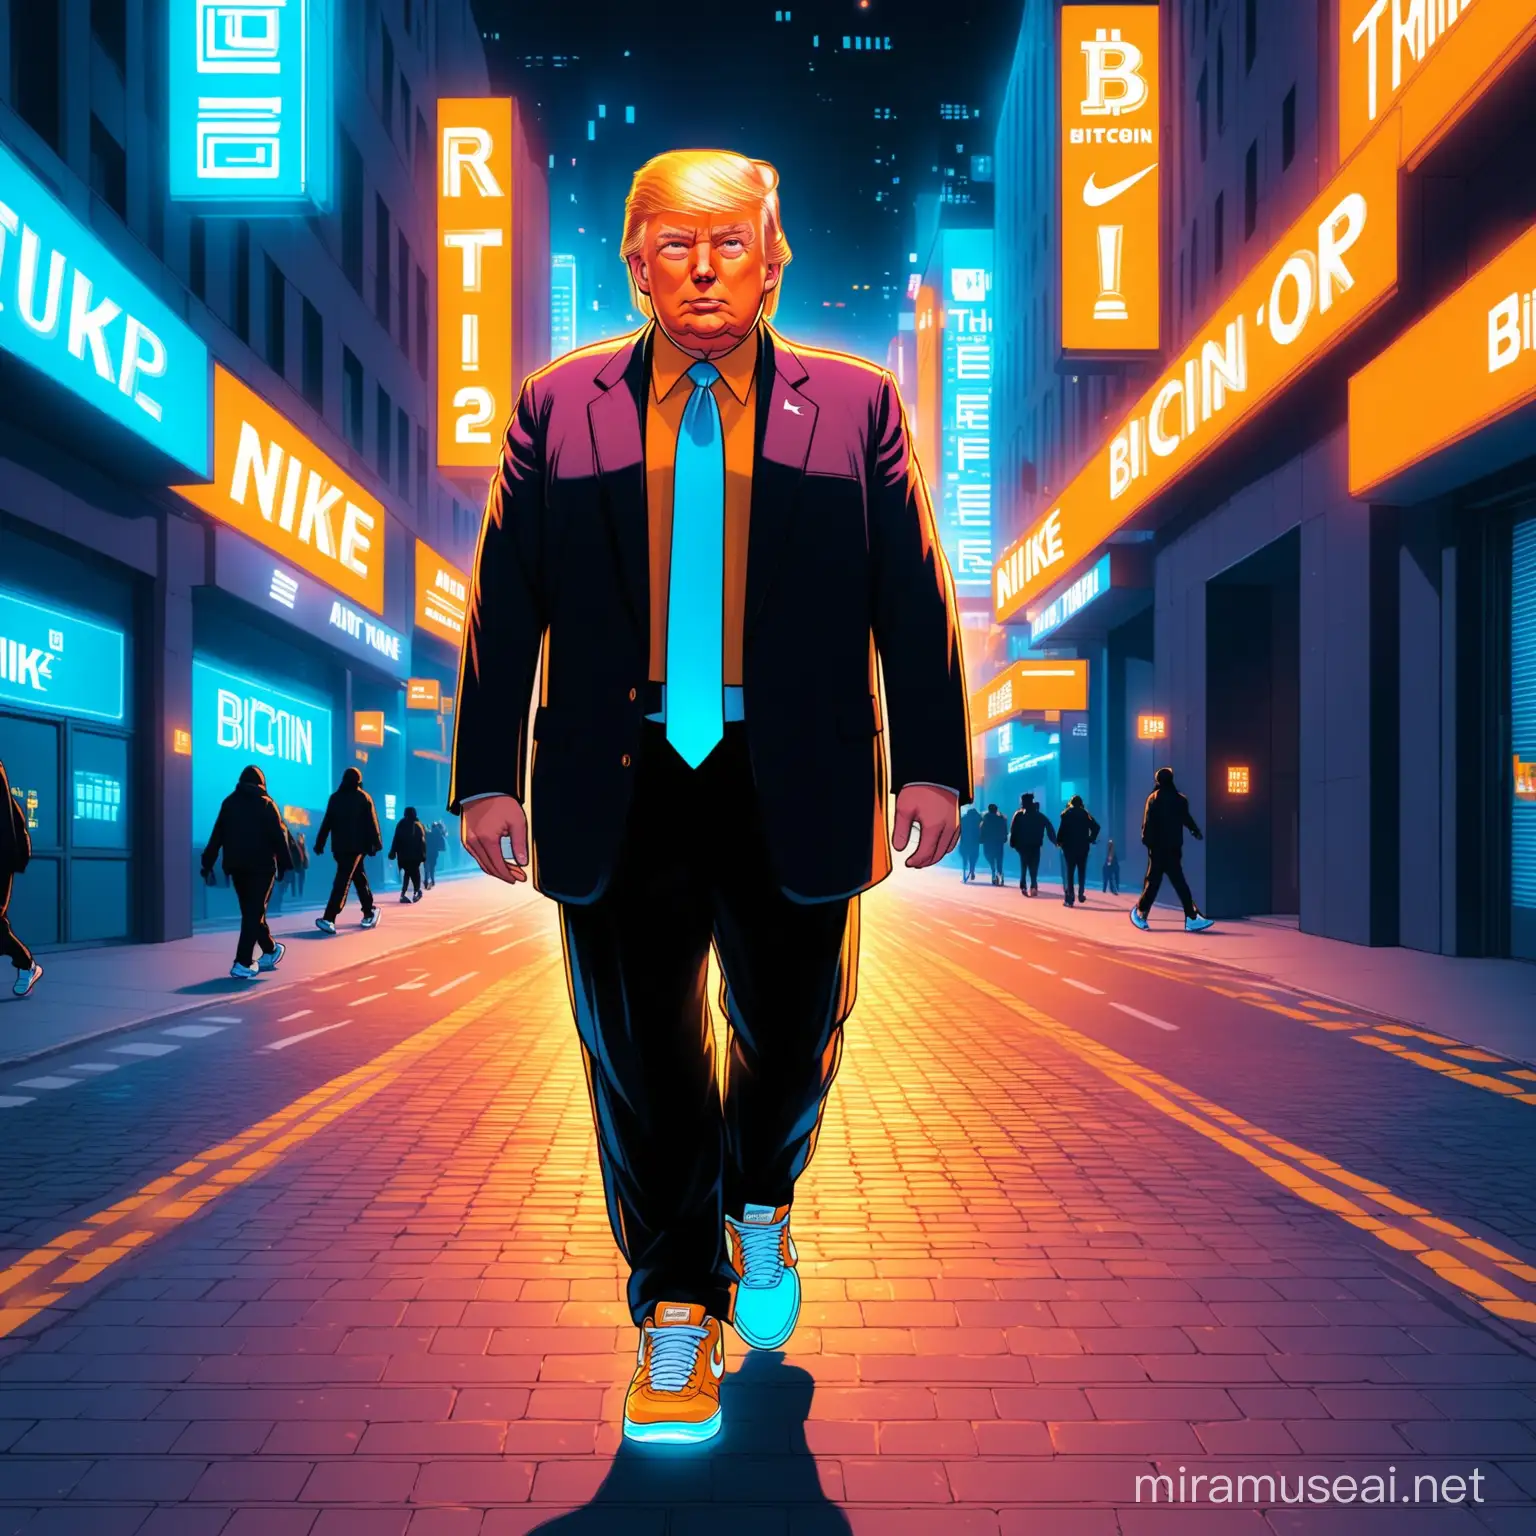 Presidential Style Donald Trump in Trendy Nike Sneakers Strolling Through a Futuristic BitcoinThemed Neon City